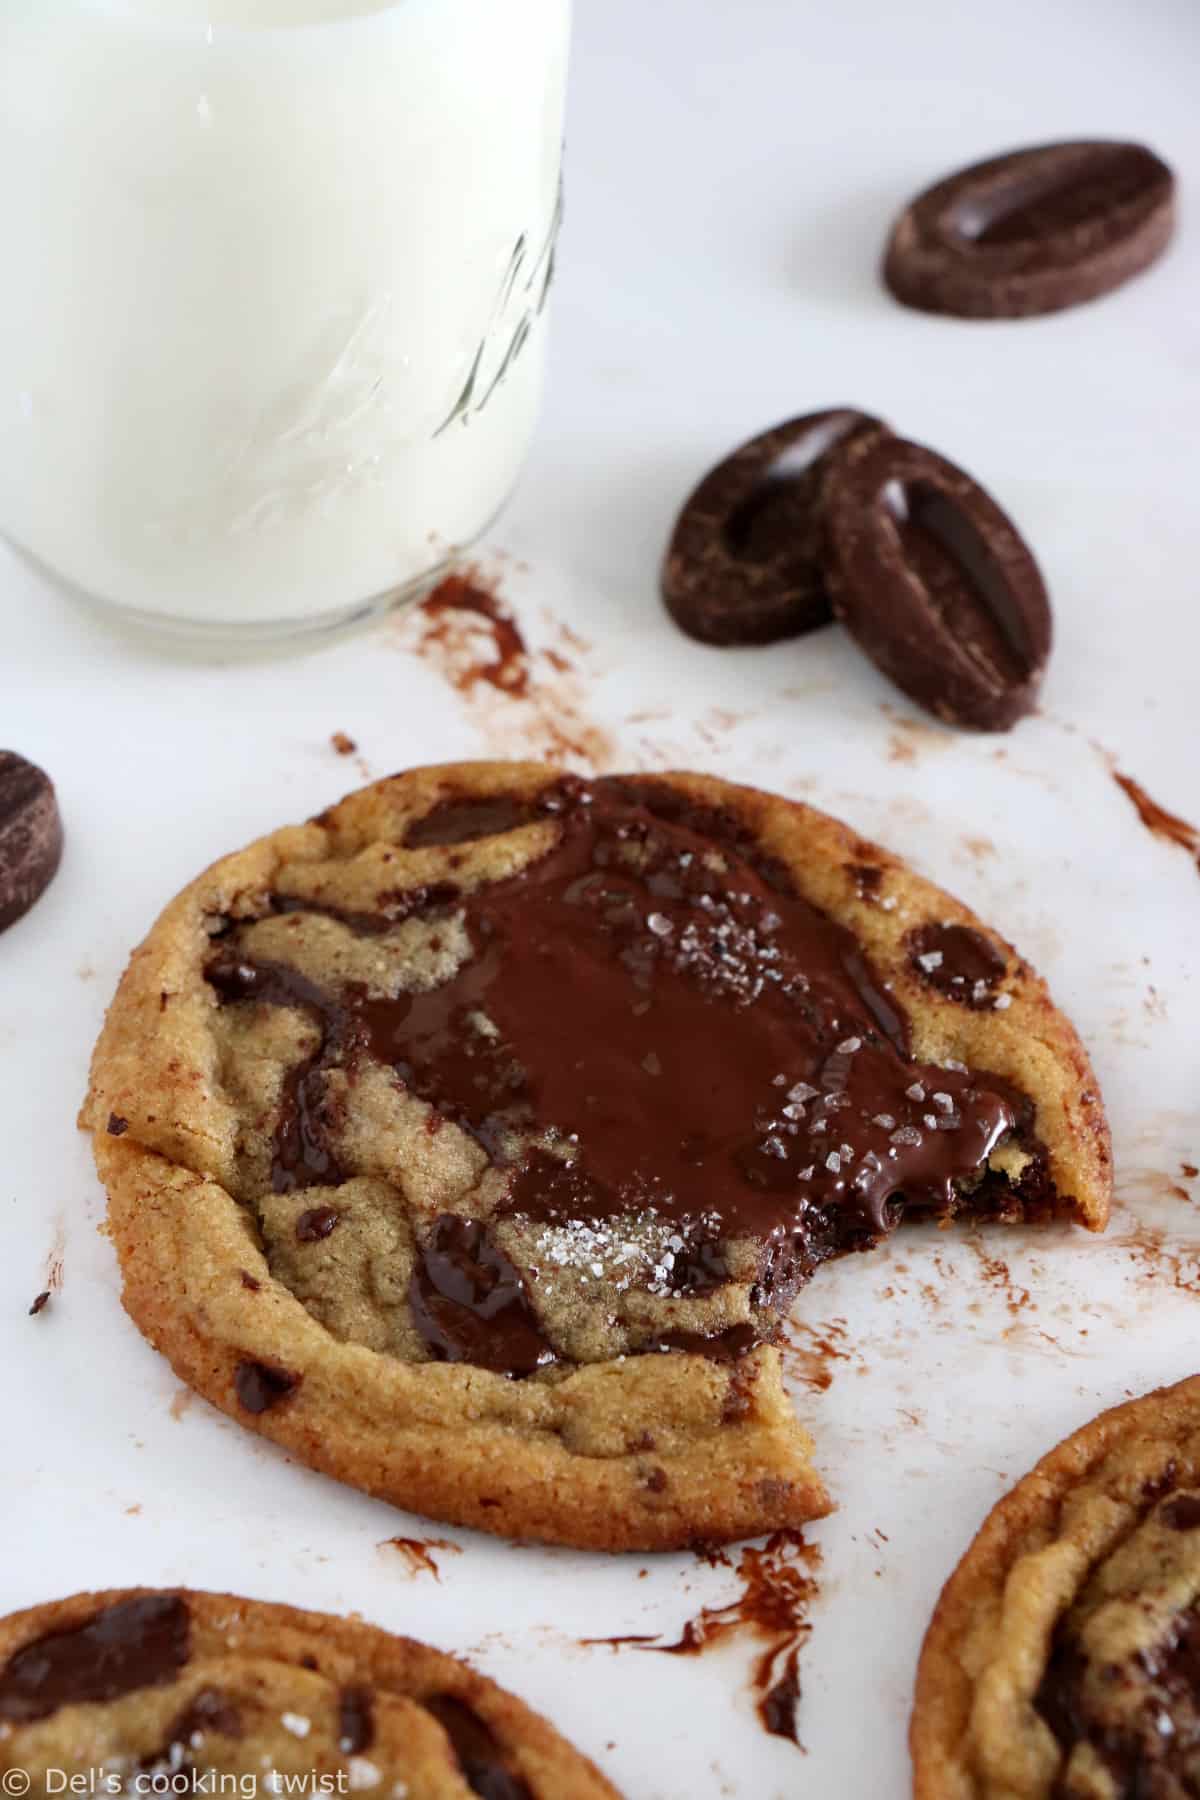 The BEST chocolate chip cookies are soft, buttery, with a slightly puffy, inflated texture, and oozing with melted chocolate puddles.